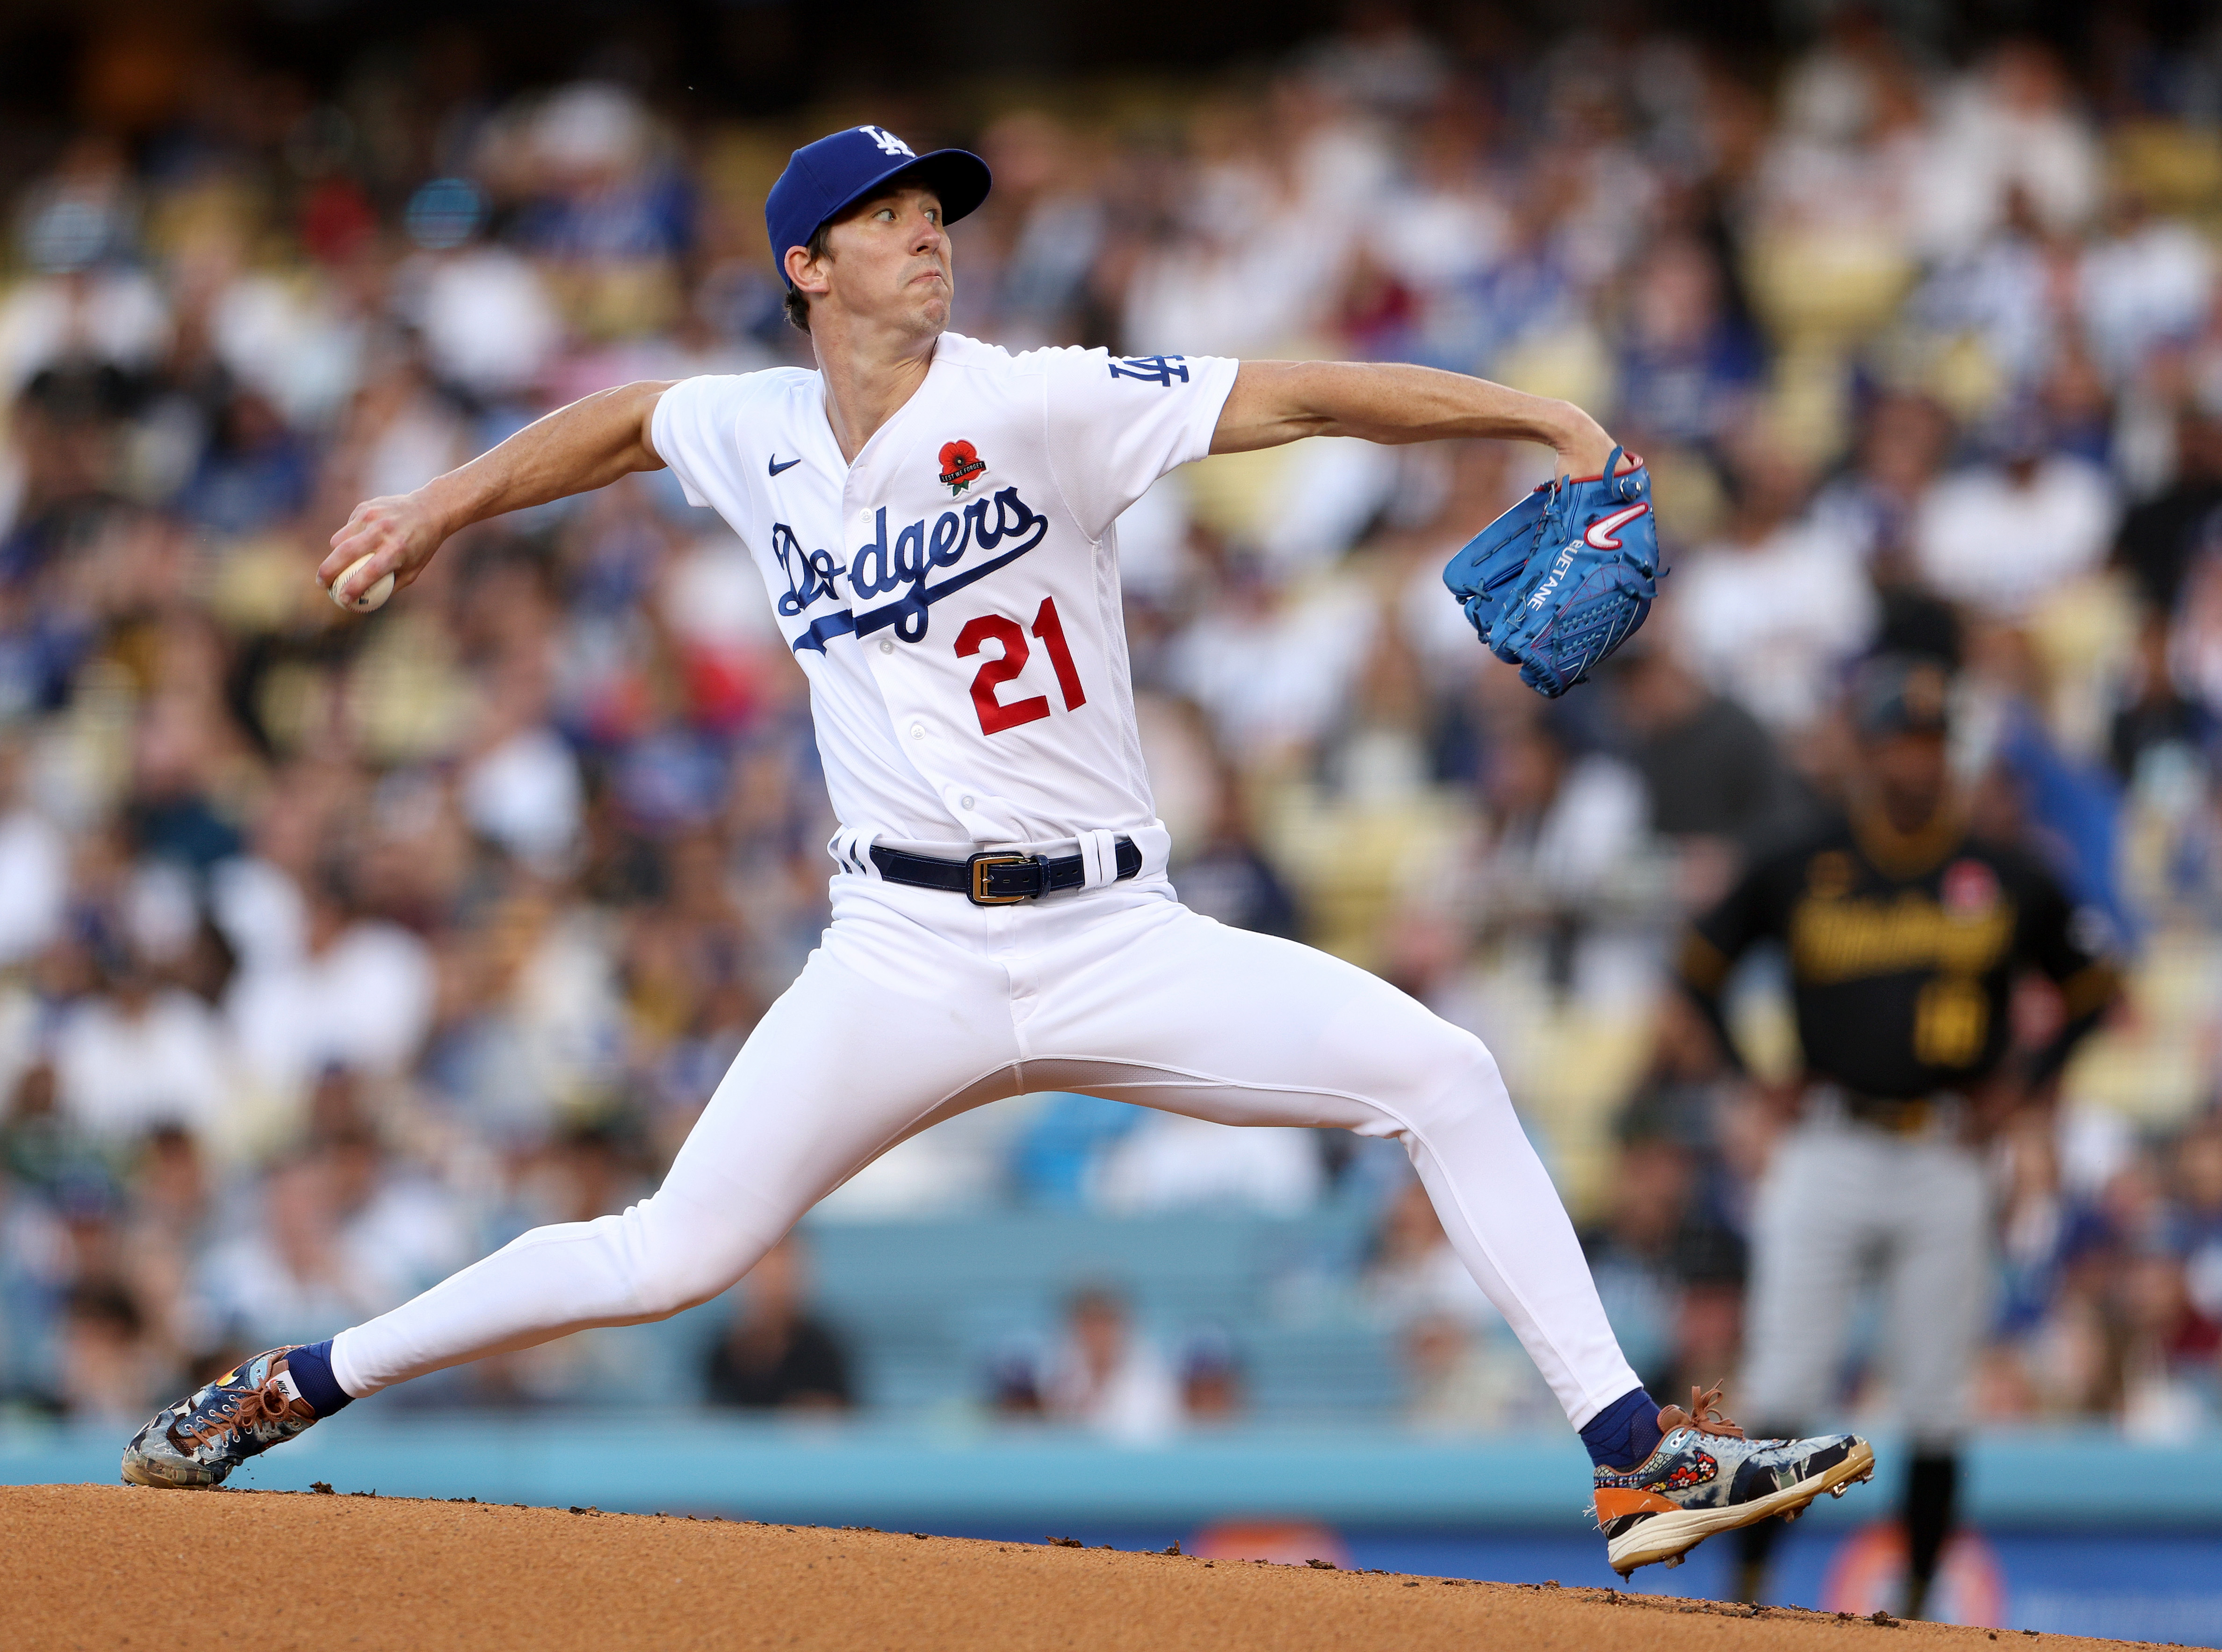 Walker Buehler Returning to Dodgers After a Nearly 2-Year Absence